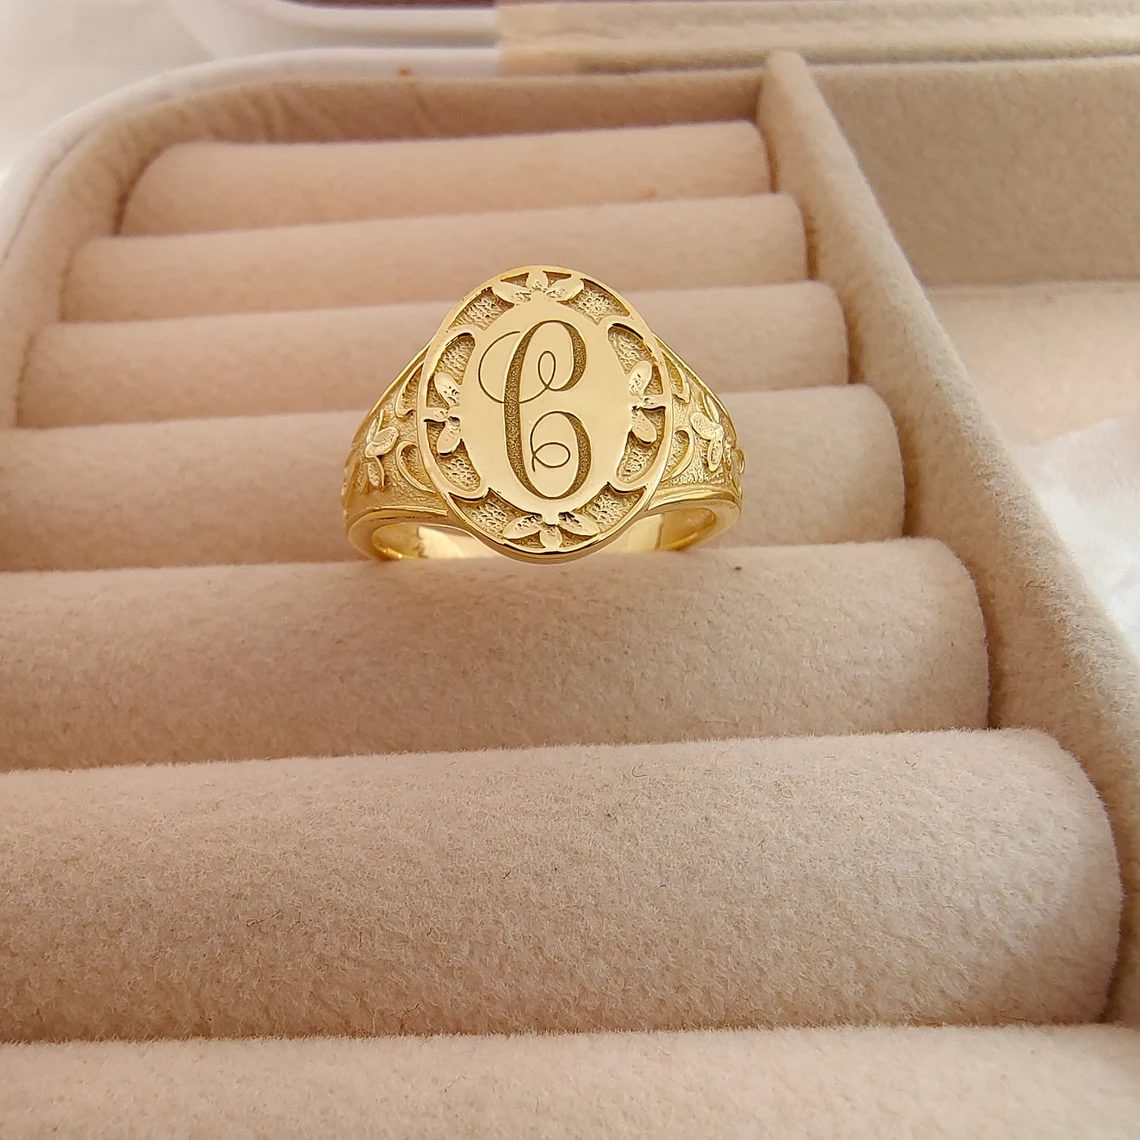 Unique Monogrammed Clover Ring Personalized Initial Engarved Ring